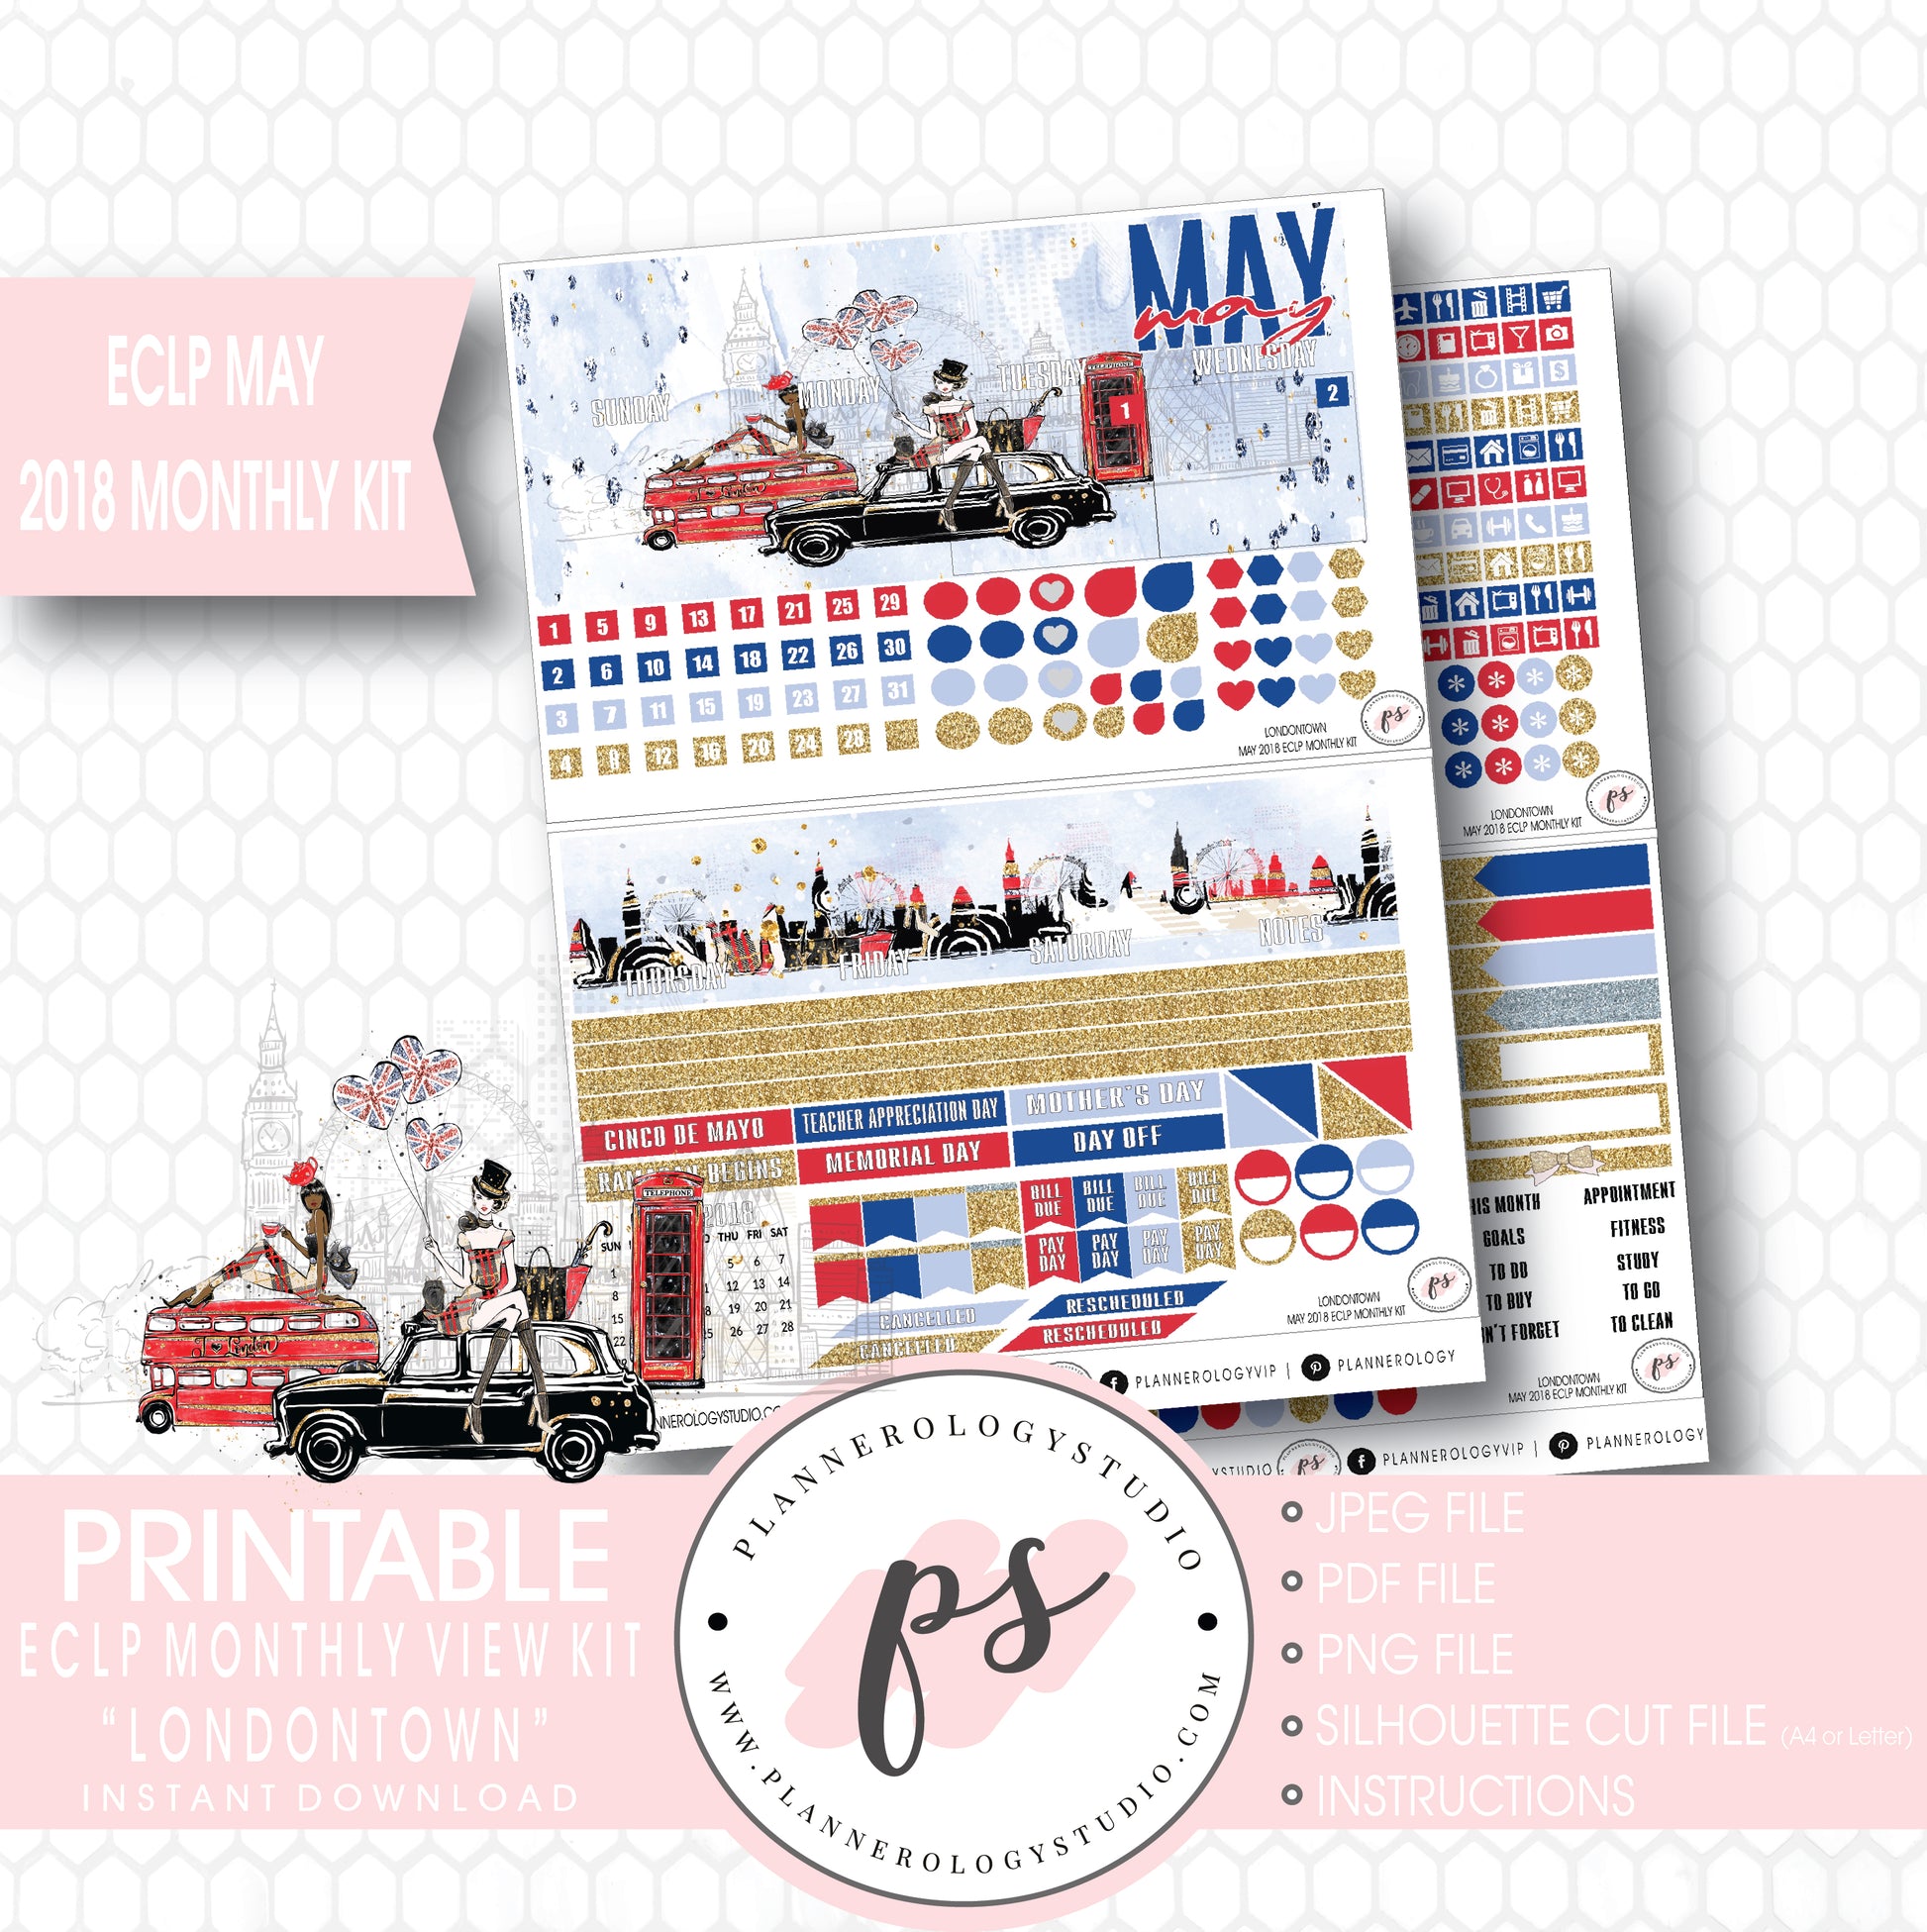 Londontown May 2018 Monthly View Kit Digital Printable Planner Stickers (for use with Erin Condren) - Plannerologystudio